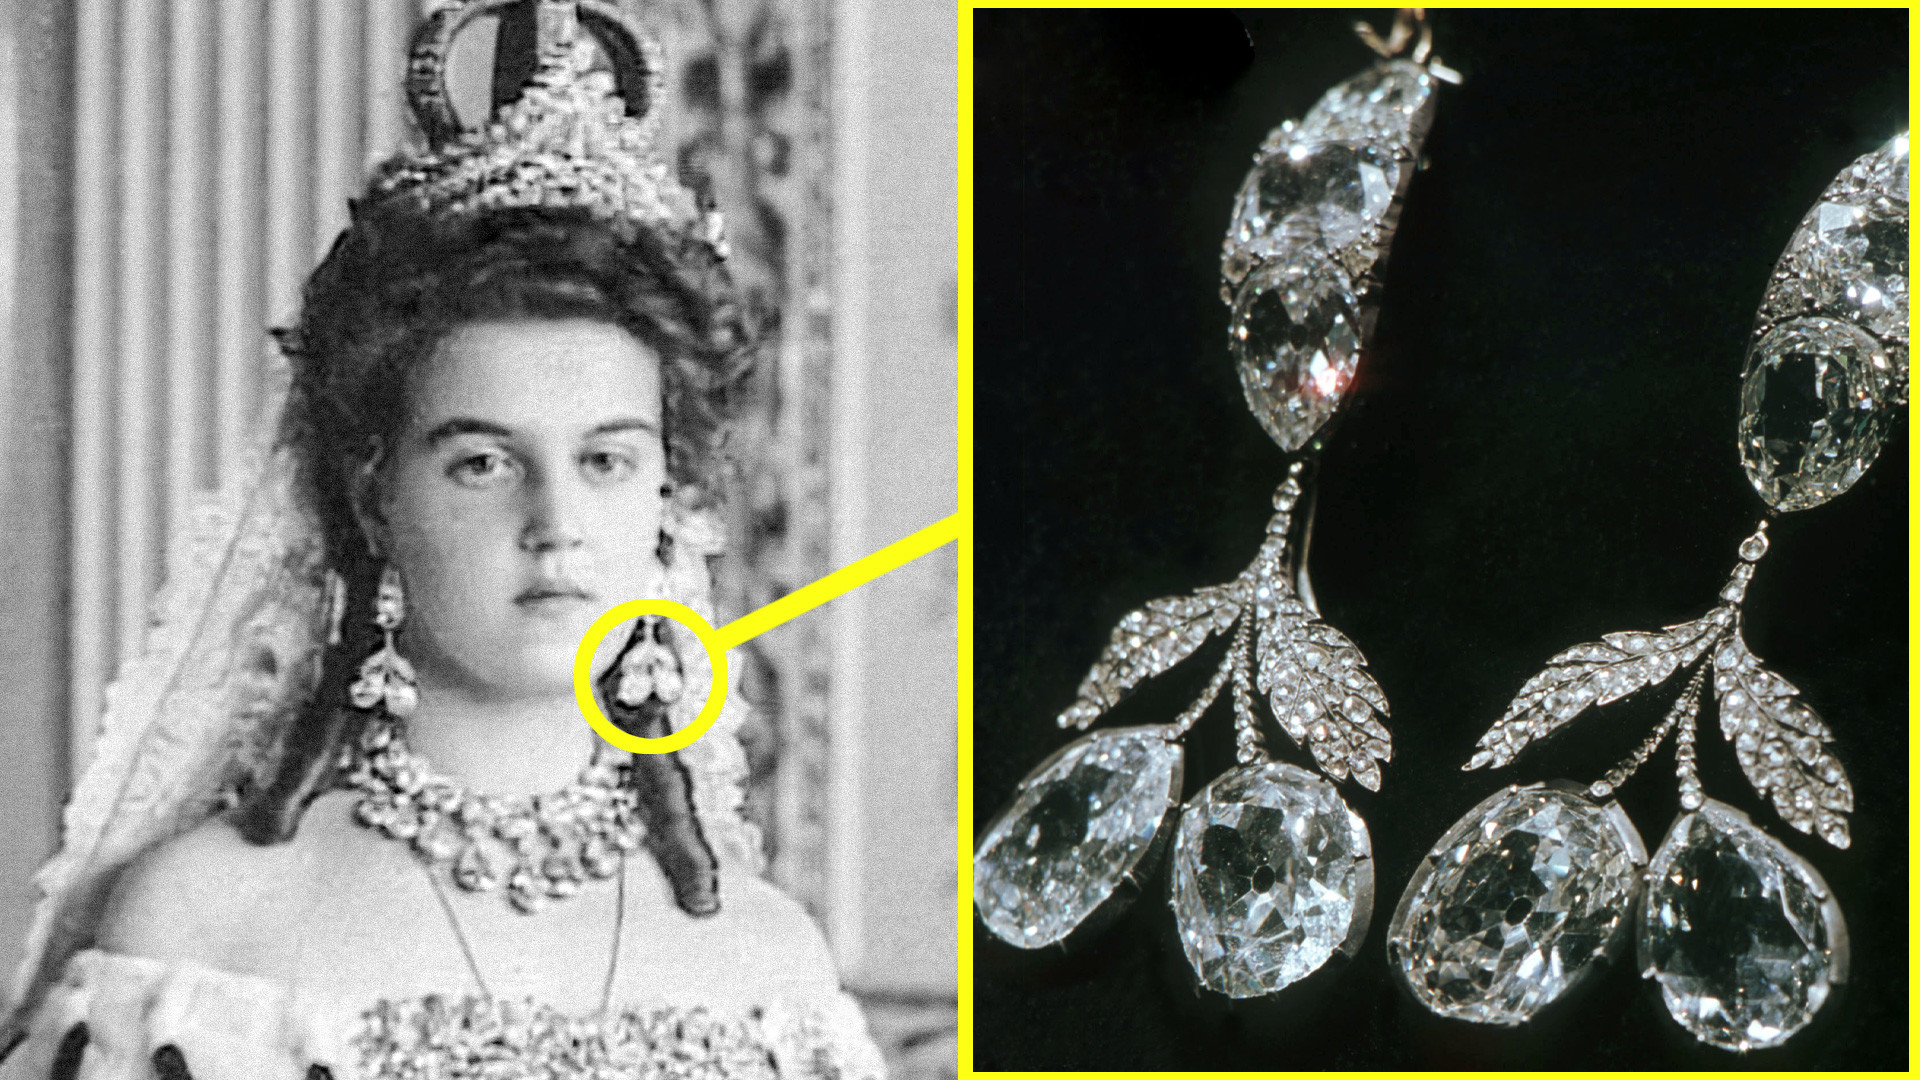 Maria Pavlovna wearing the Cherry earrings and the diadem with pink diamond. Now both these items are kept in Moscow's Diamond Fund. The wedding crown was sold abroad.